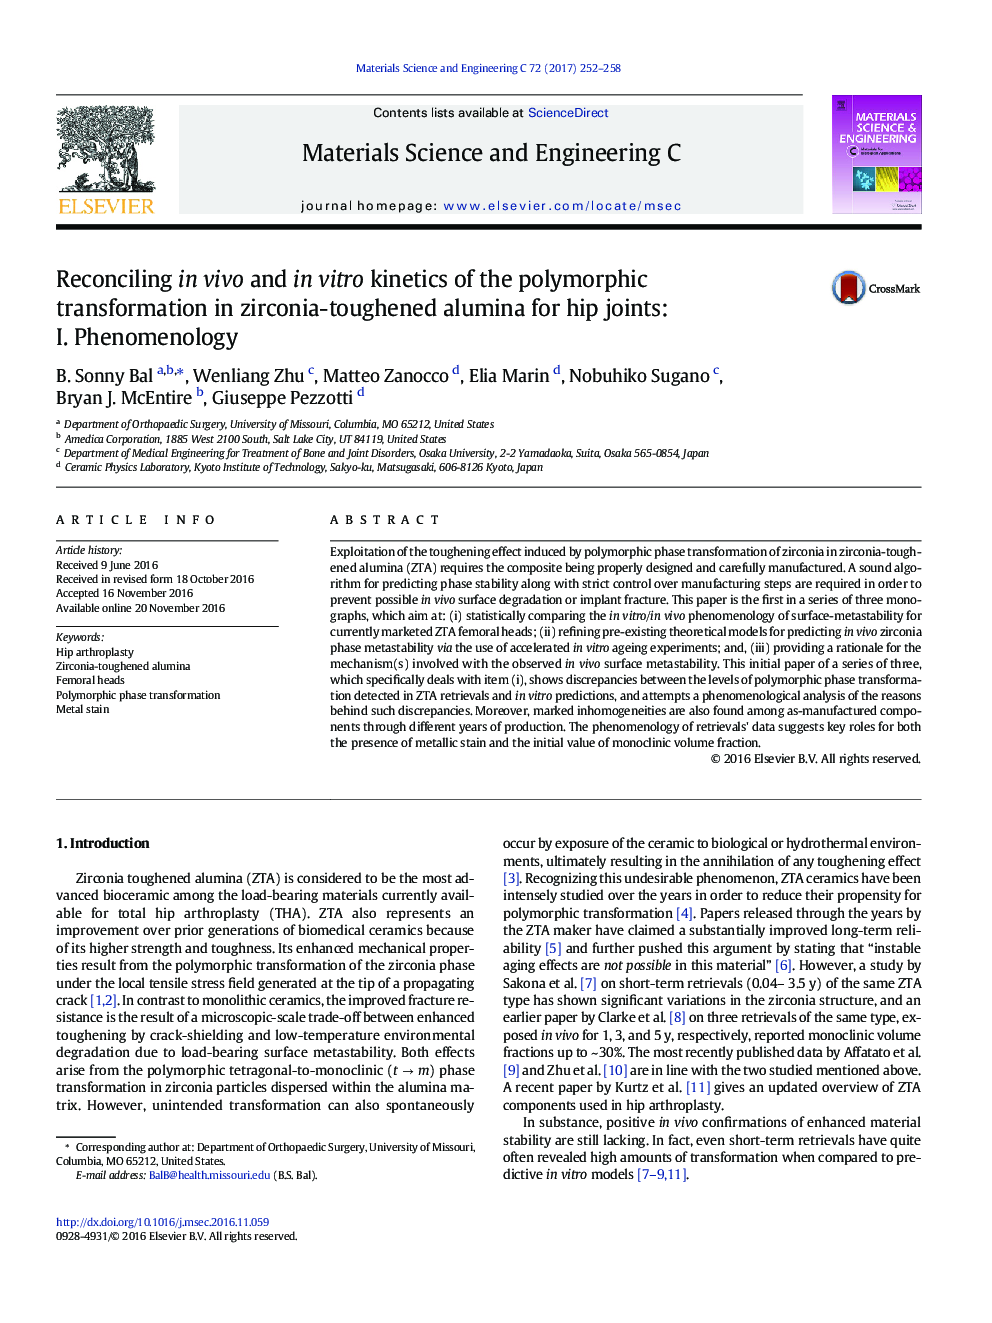 Reconciling in vivo and in vitro kinetics of the polymorphic transformation in zirconia-toughened alumina for hip joints: I. Phenomenology